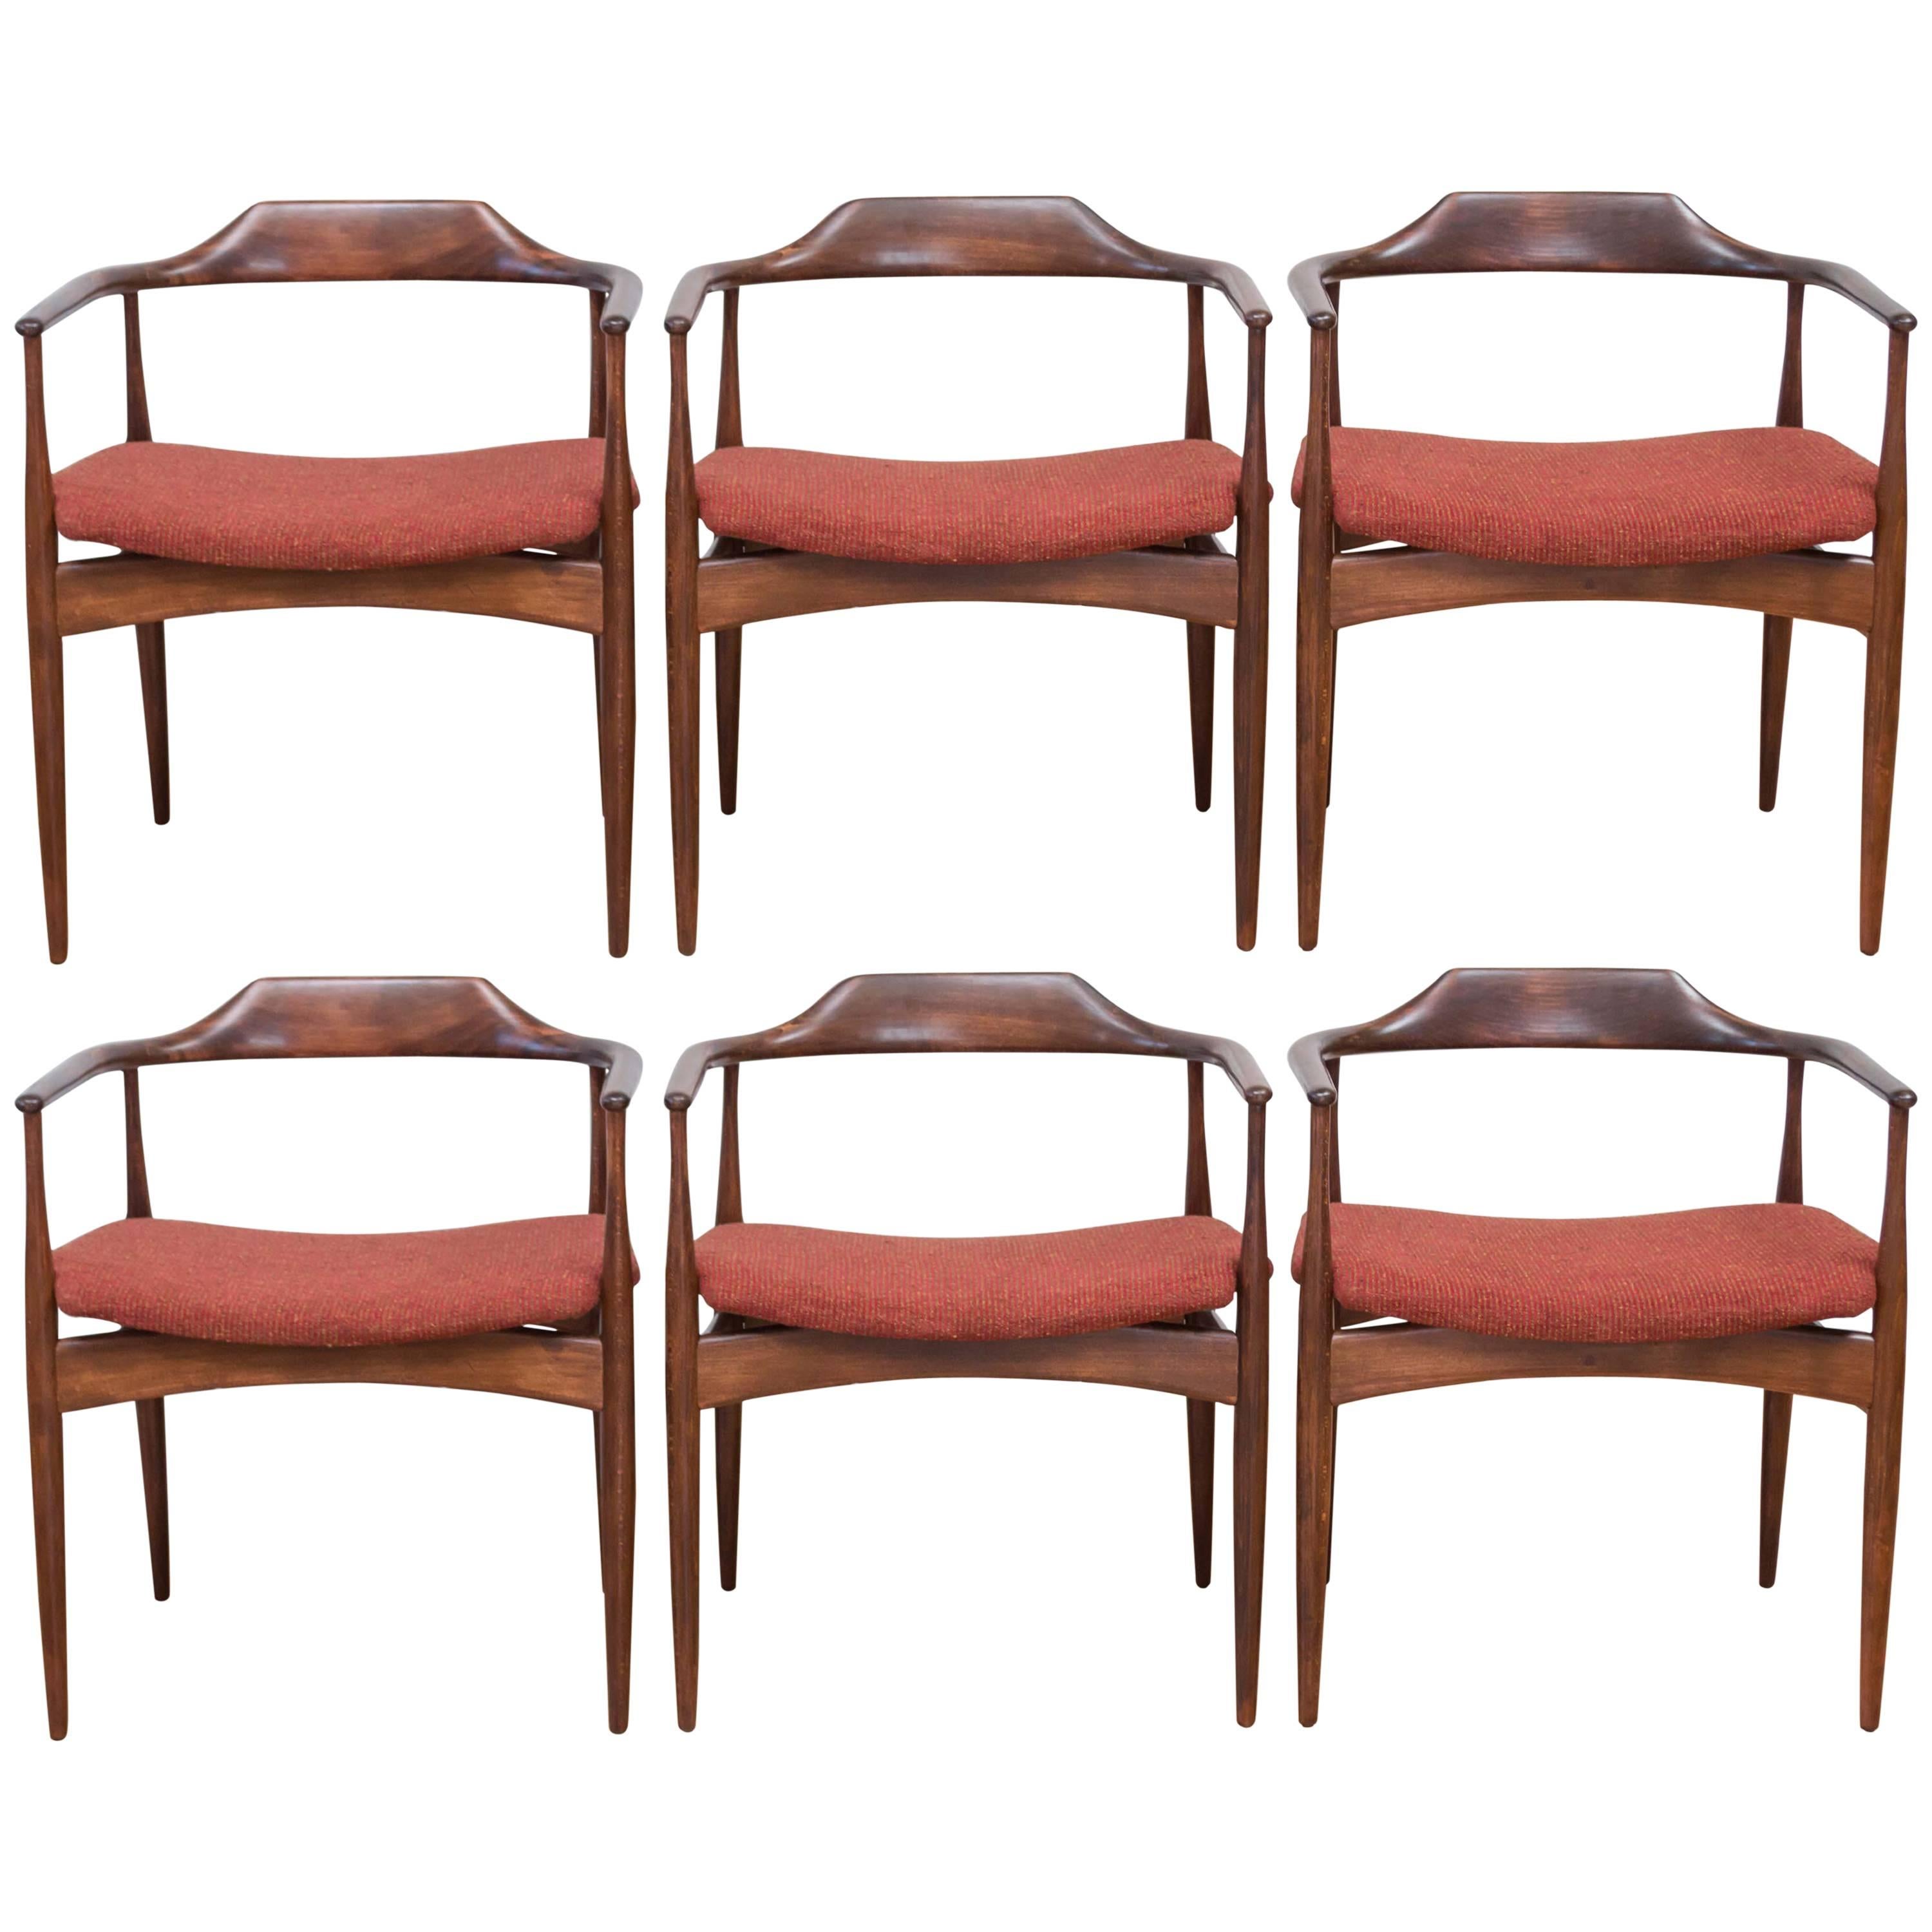 Six-Piece Set of Dining Chairs by Ib Kofod-Larsen for Selig